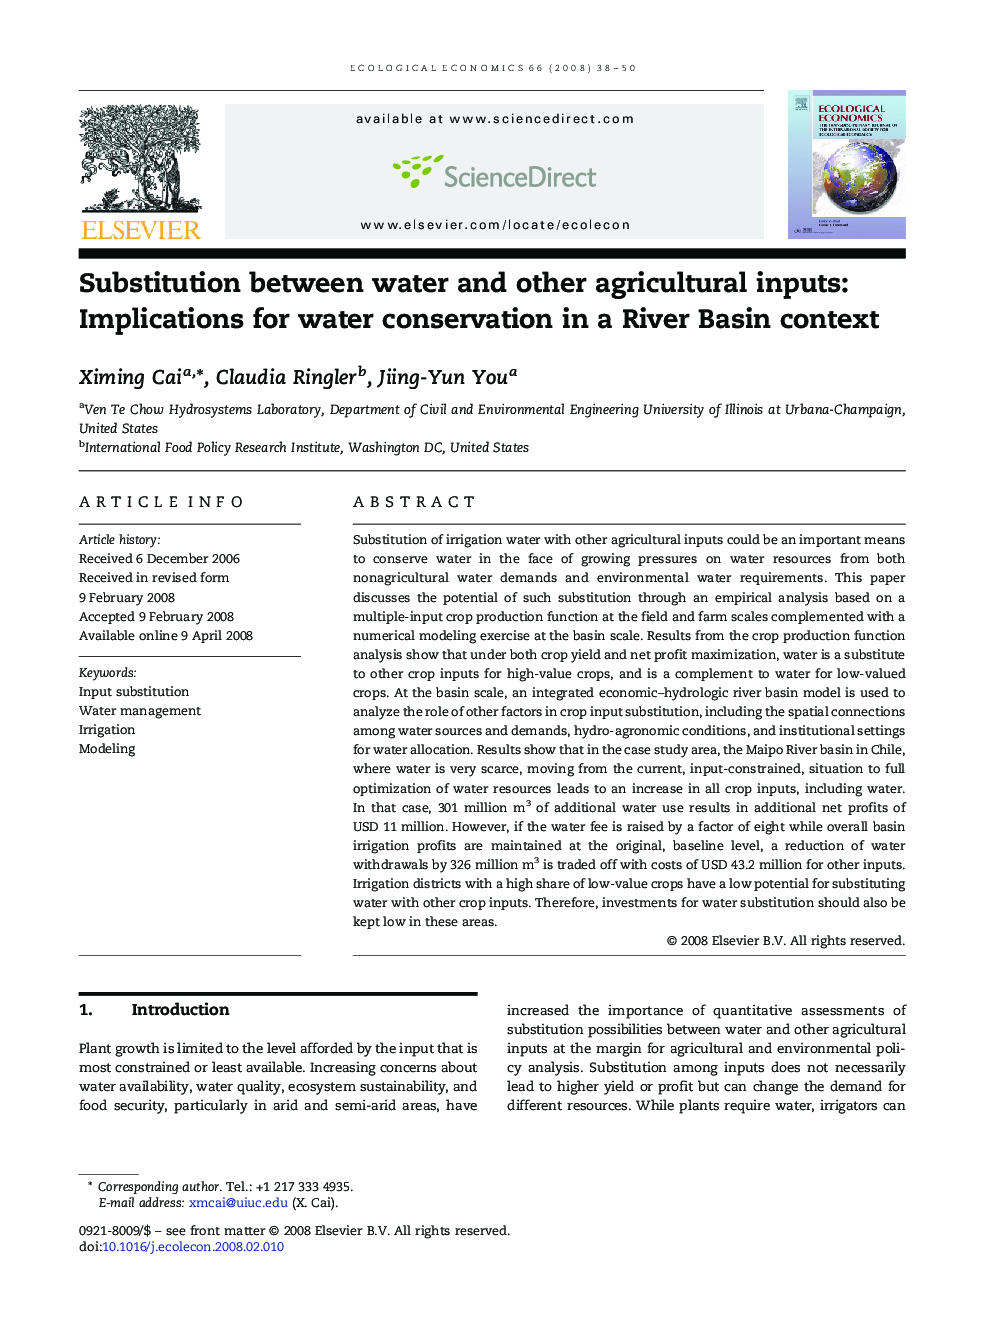 Substitution between water and other agricultural inputs: Implications for water conservation in a River Basin context